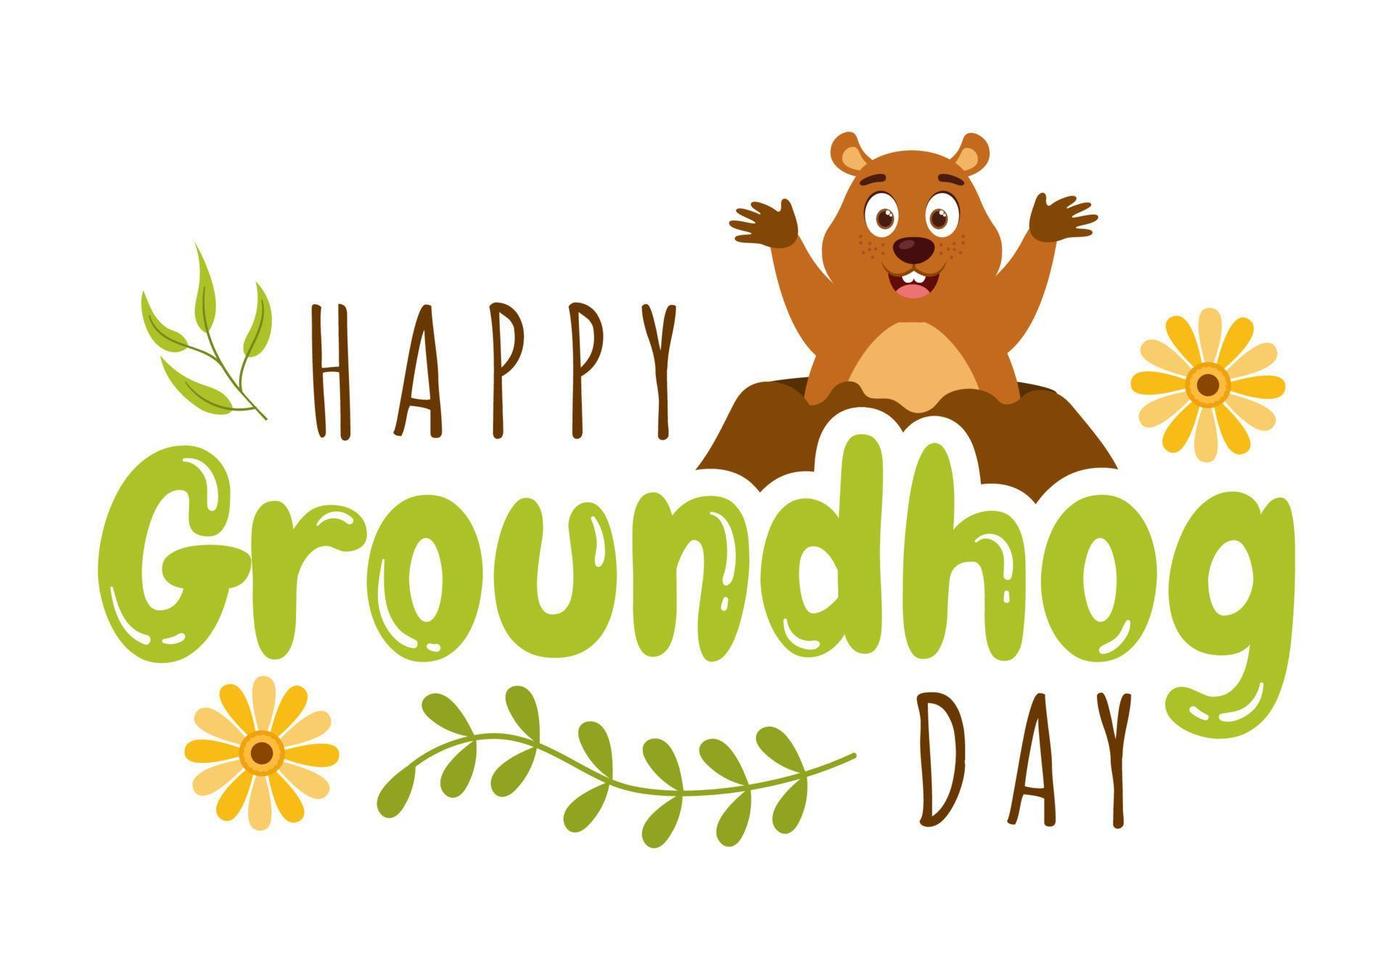 Happy Groundhog Day on February 2 with Cute Marmot Character and Garden Background Template Hand Drawn Cartoon Flat Illustration vector